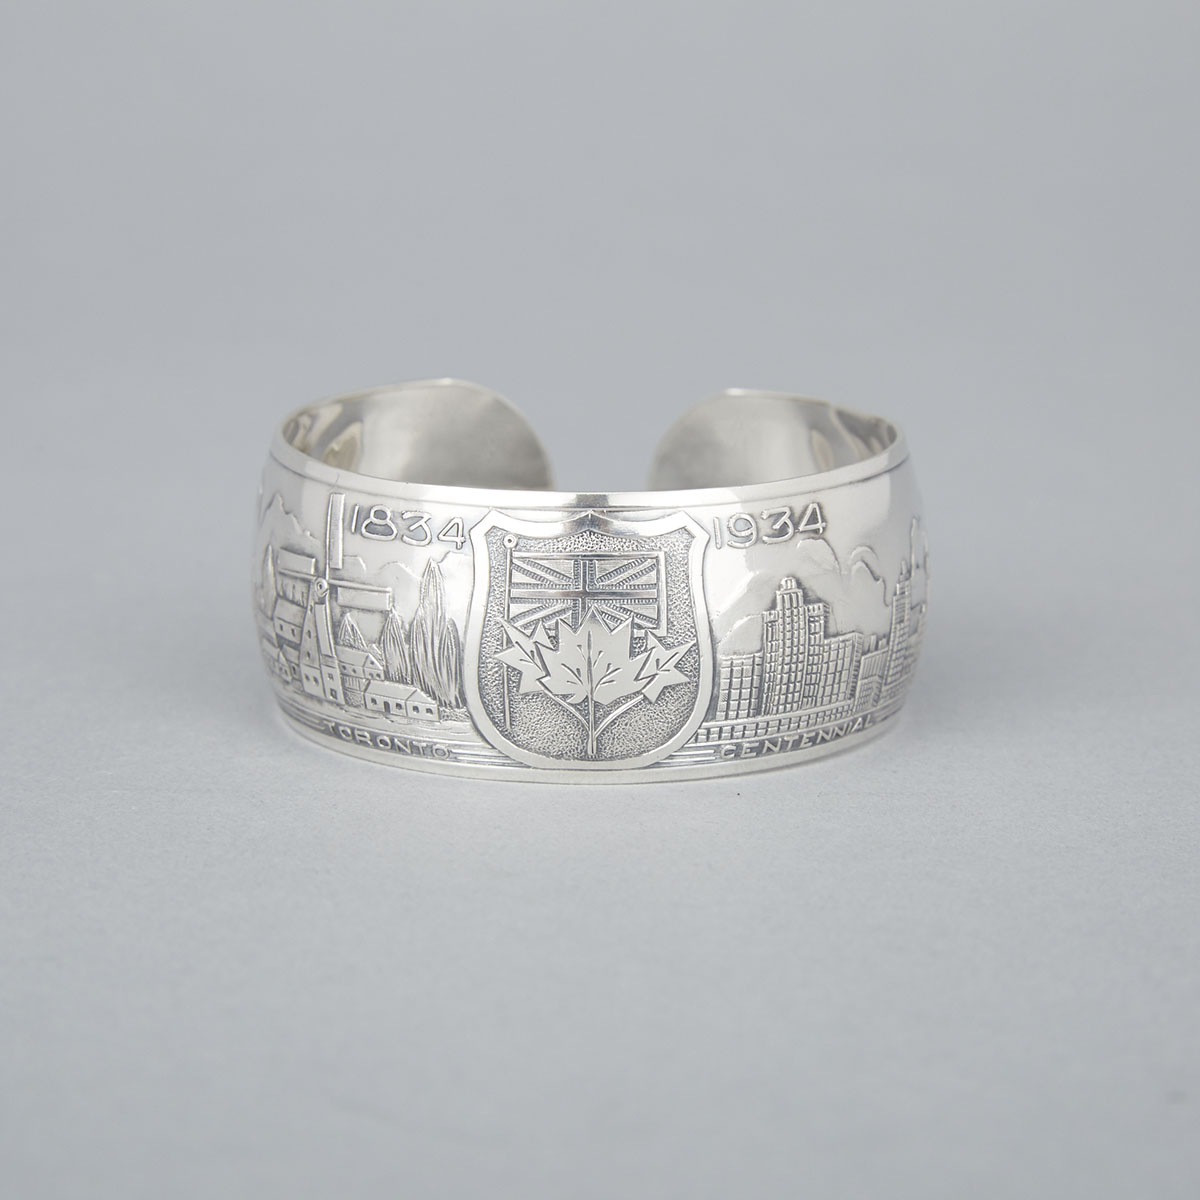 Canadian Silver Toronto Centennial Cuff Bangle, Henry Birks & Sons, Montreal, Que., 1934